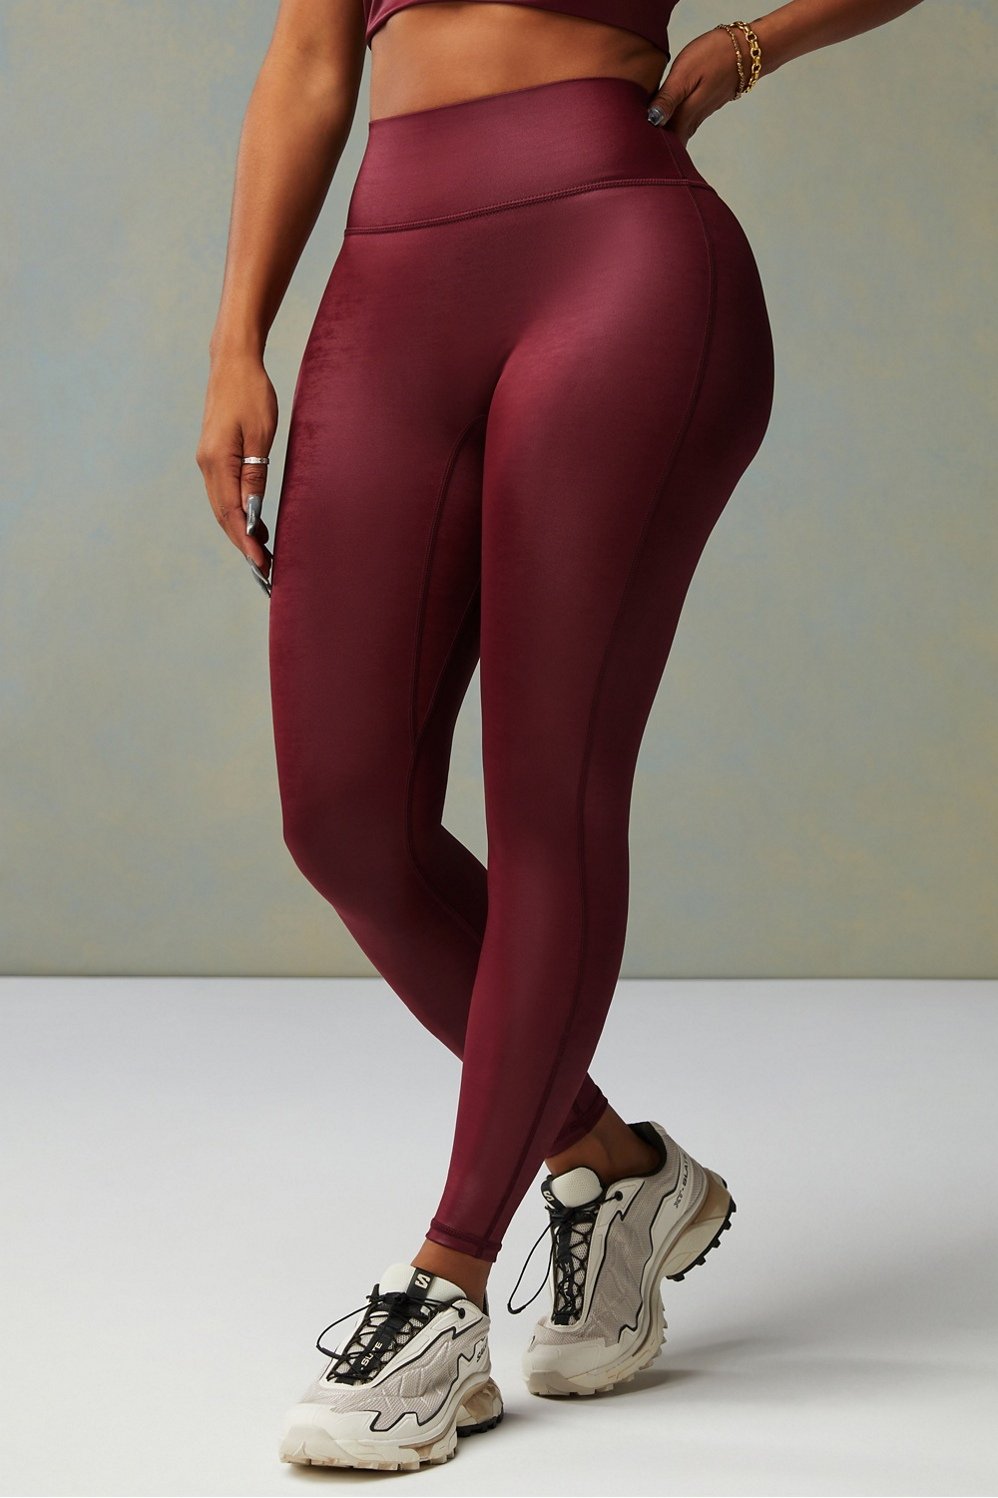 Fabletics MOTION 365 LEGGINGS Size M - $28 - From Justine